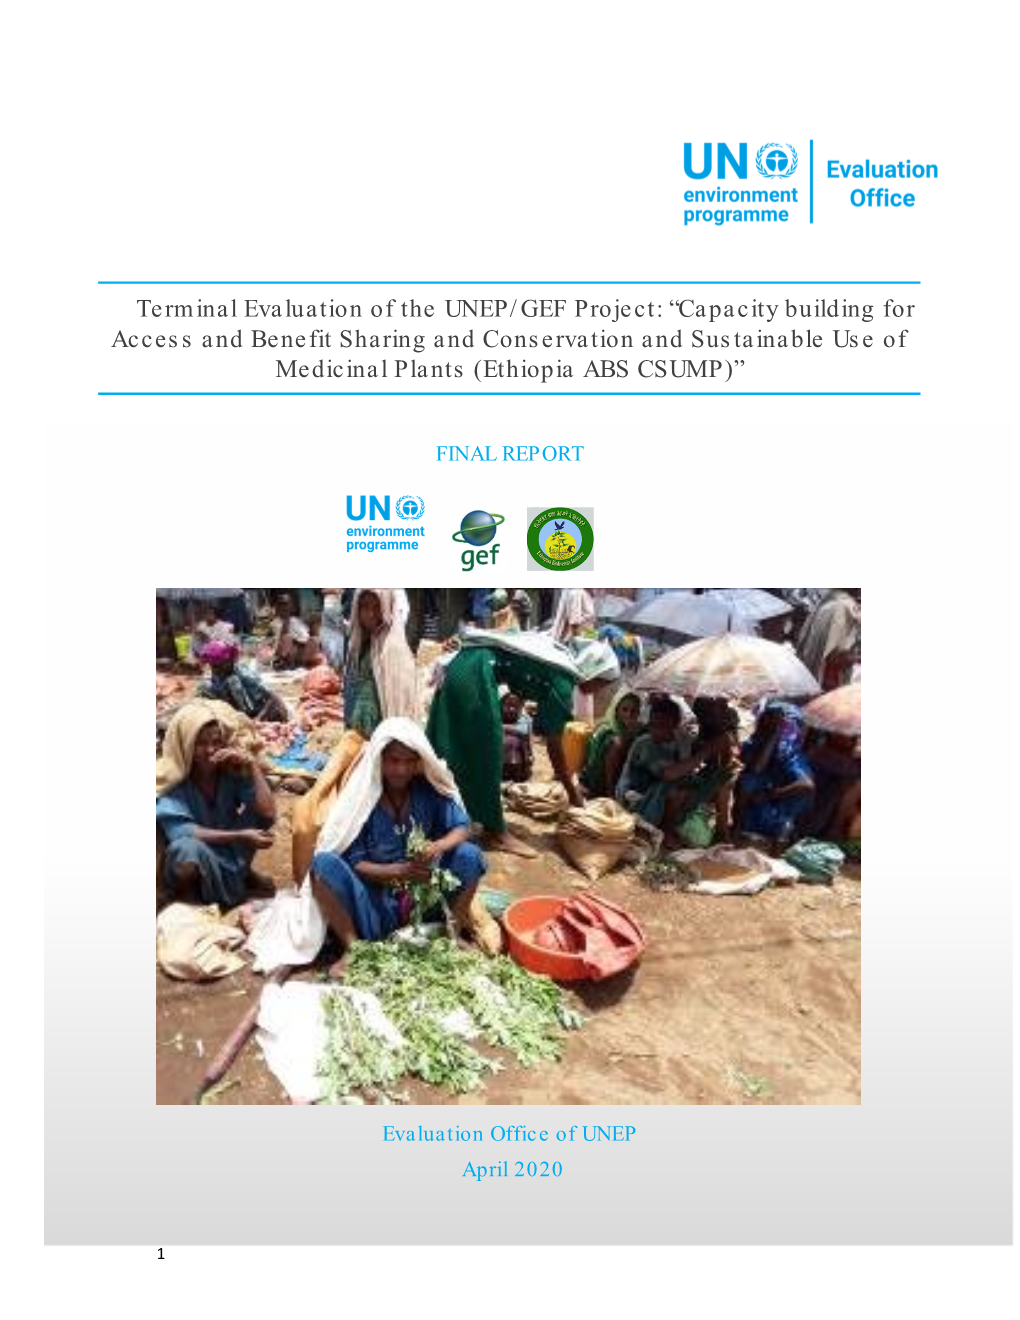 Terminal Evaluation of the UNEP/GEF Project: “Capacity Building For